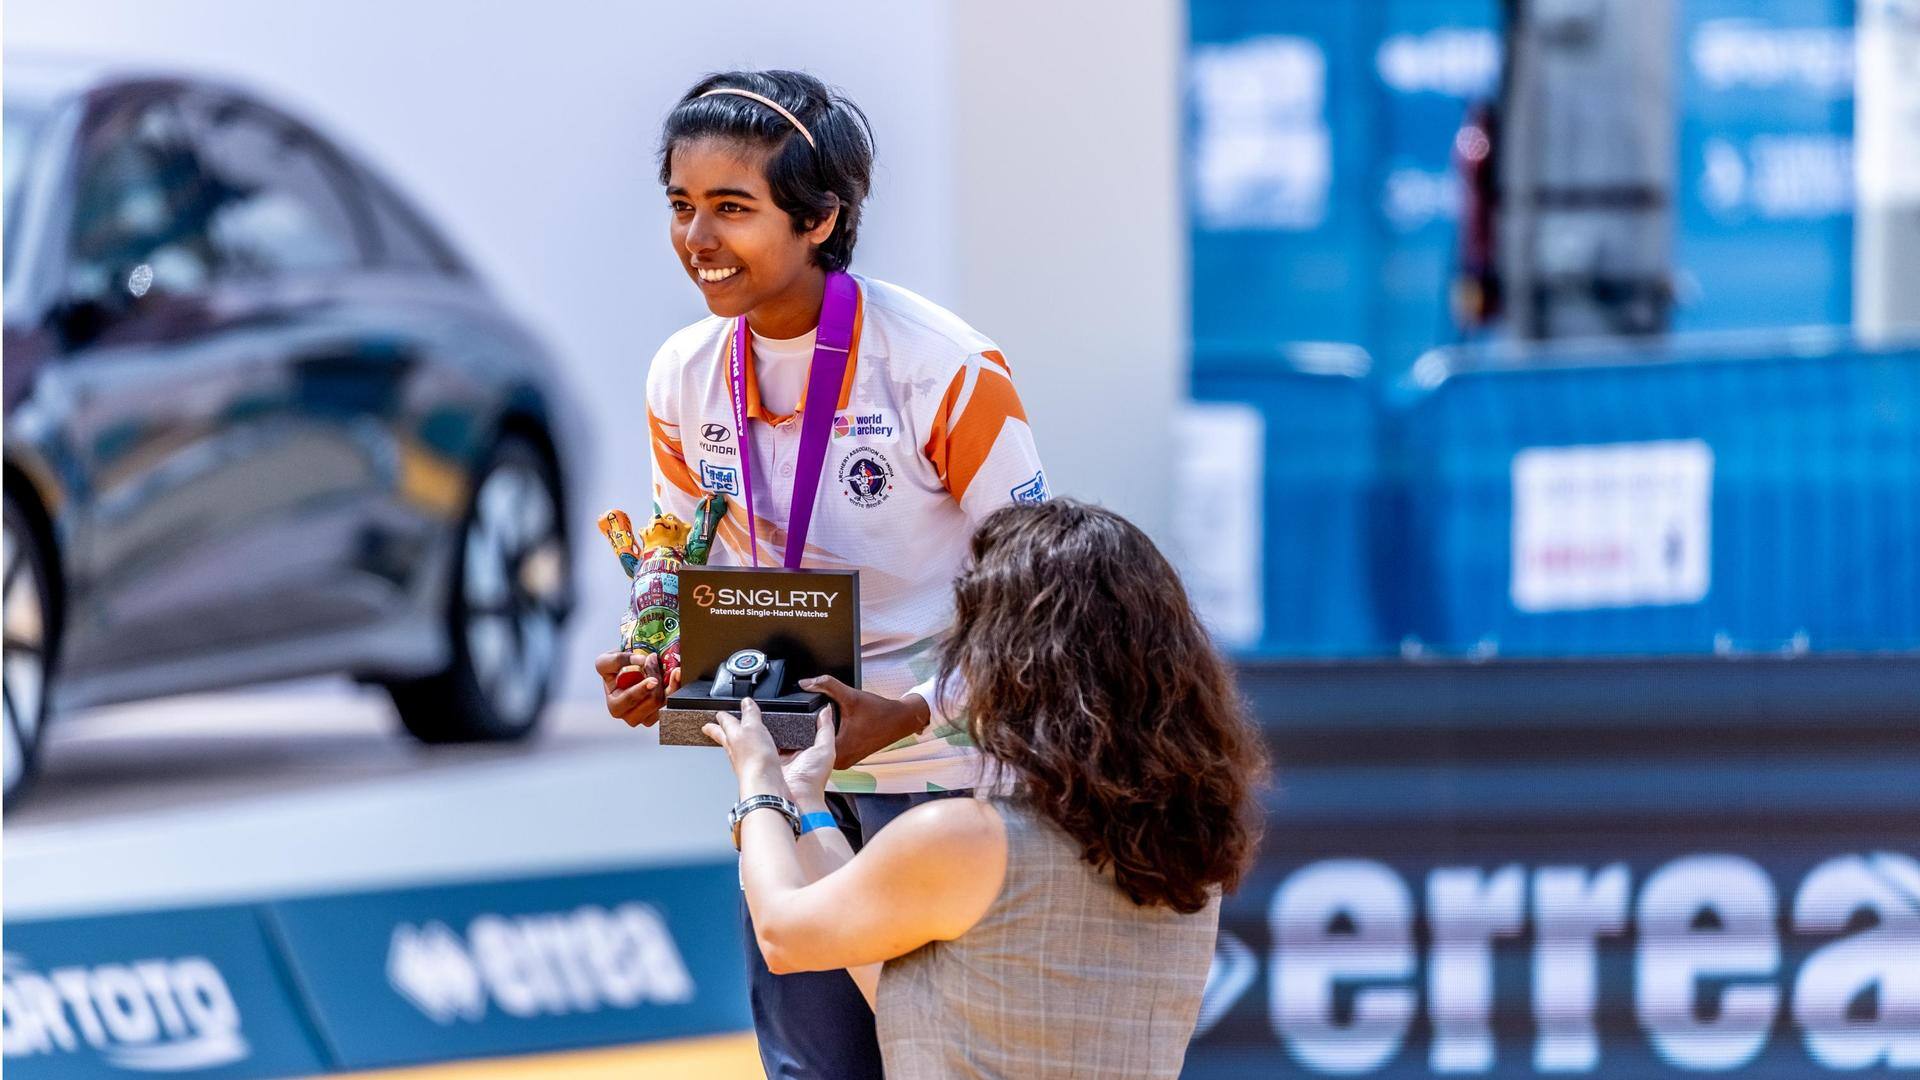 Who are archery world champions Aditi Swami and Ojas Deotale?